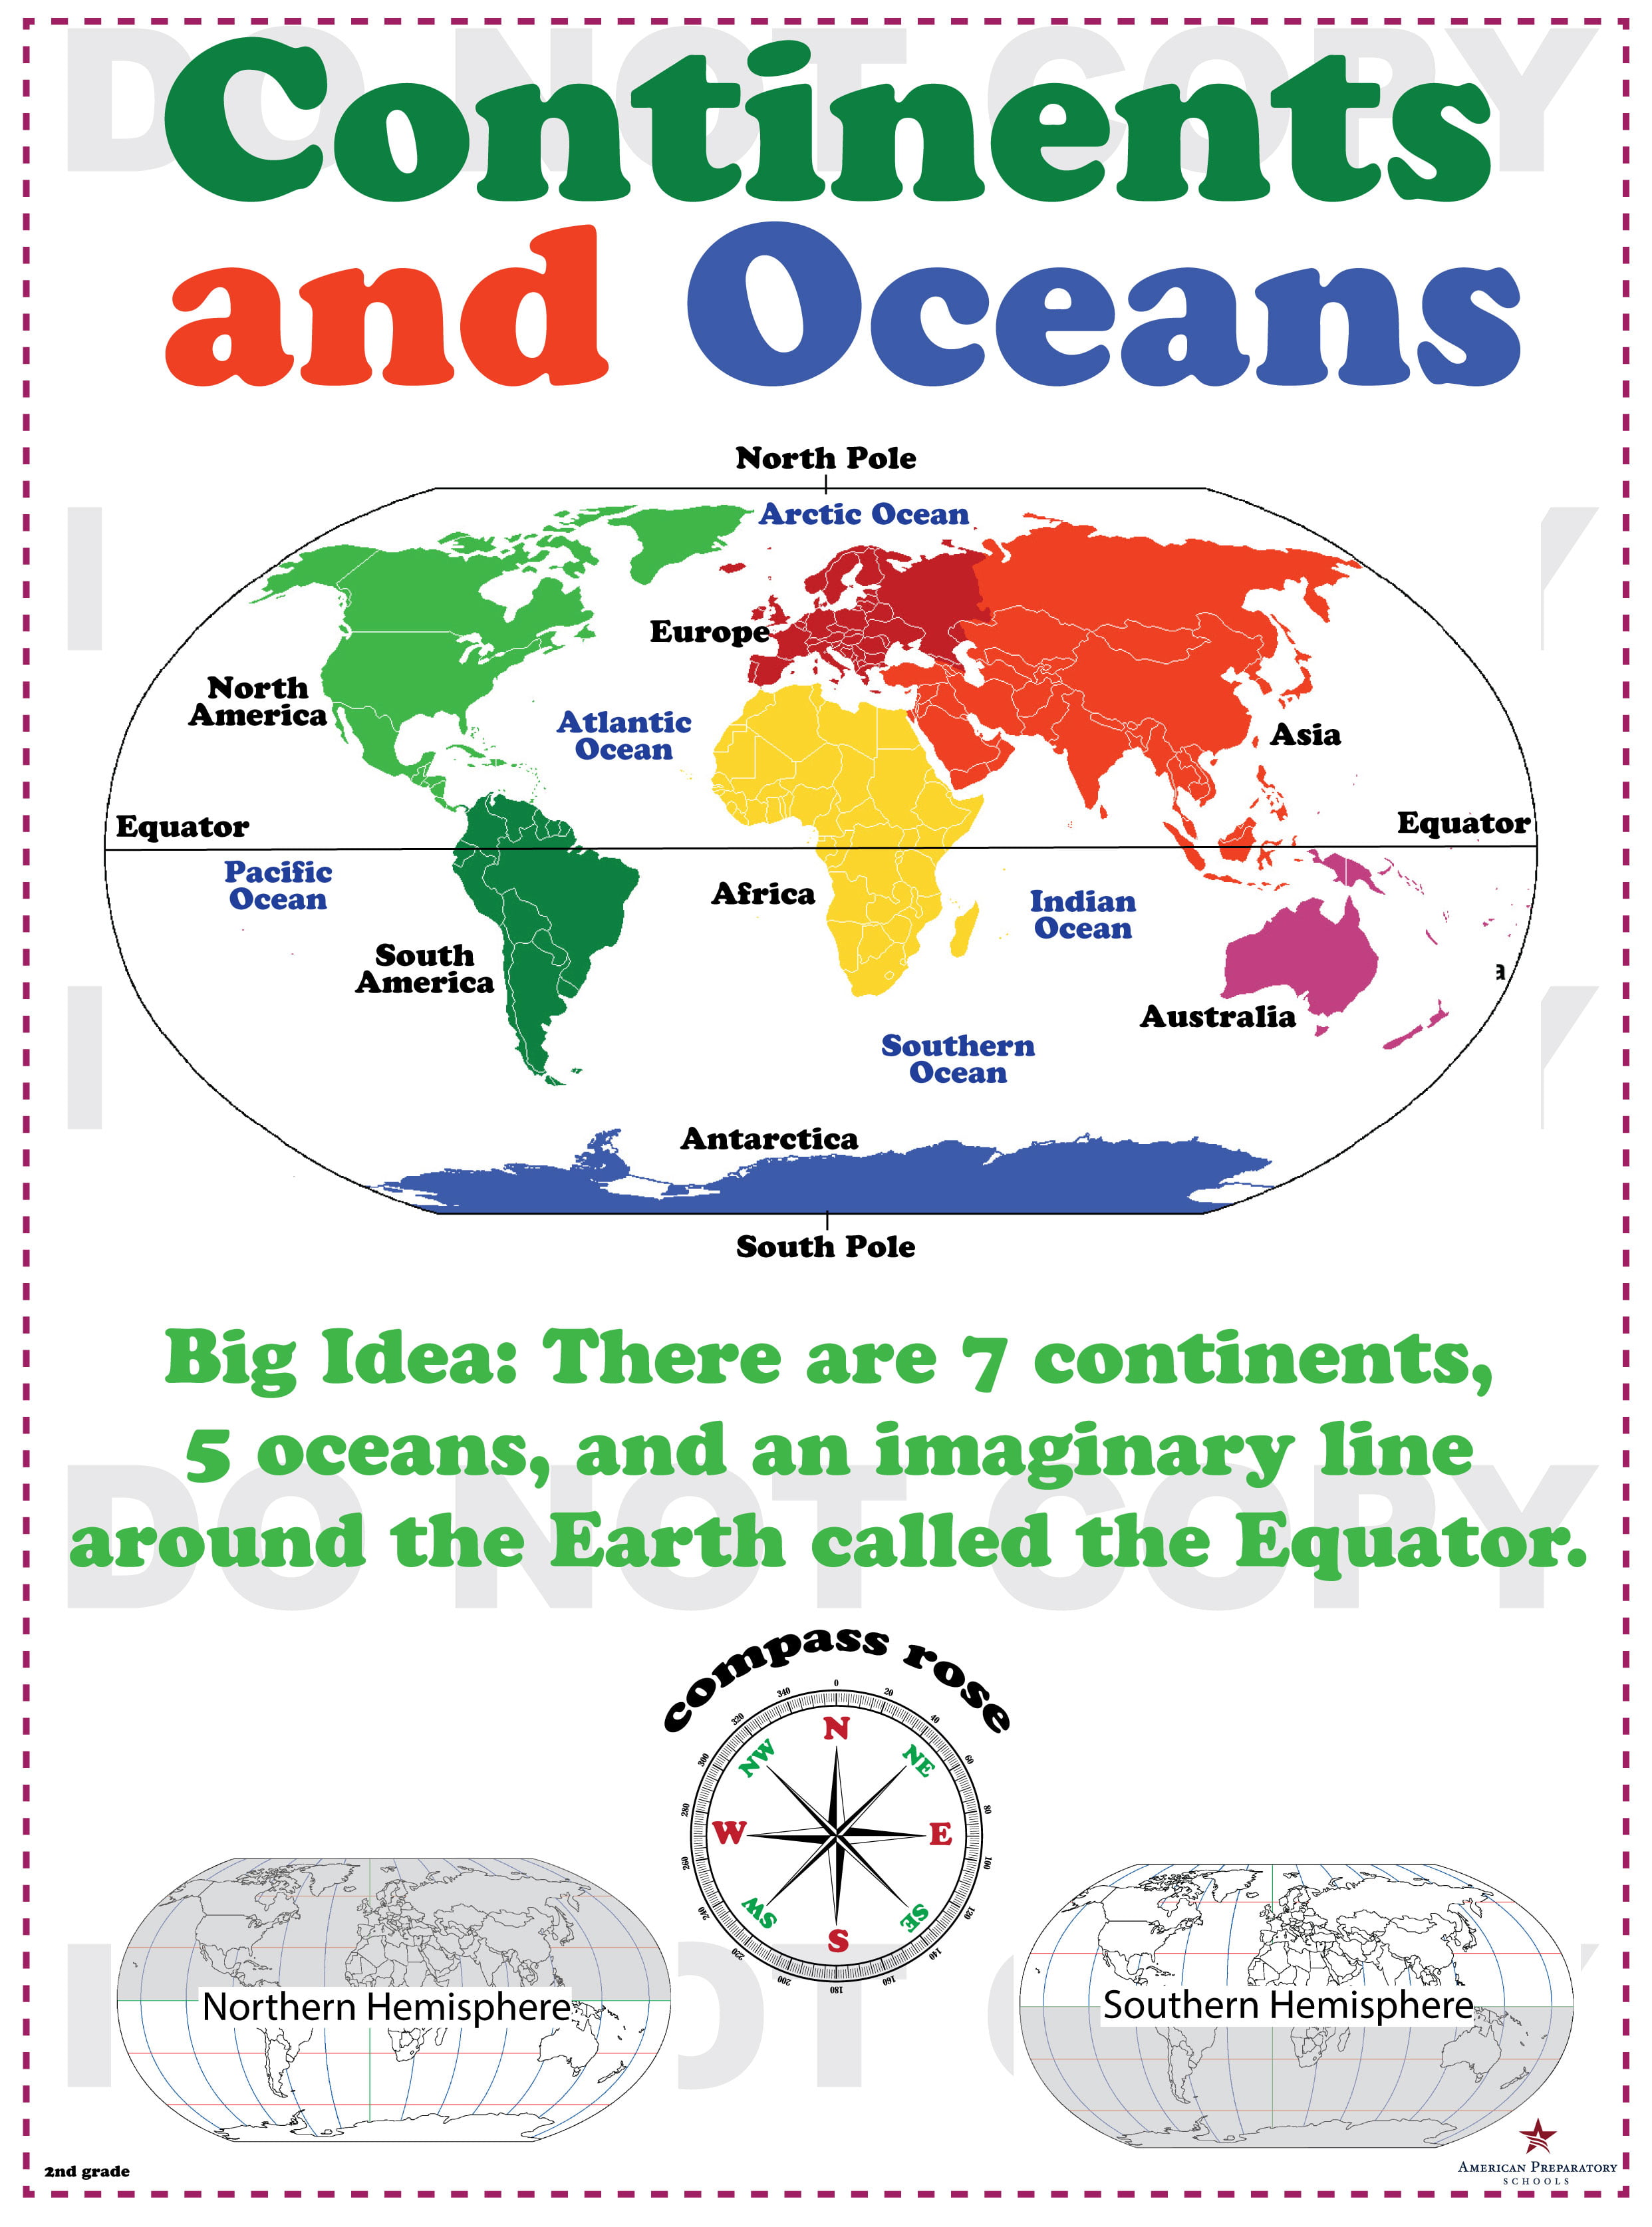 continents-and-oceans-2nd-grade-american-preparatory-schools